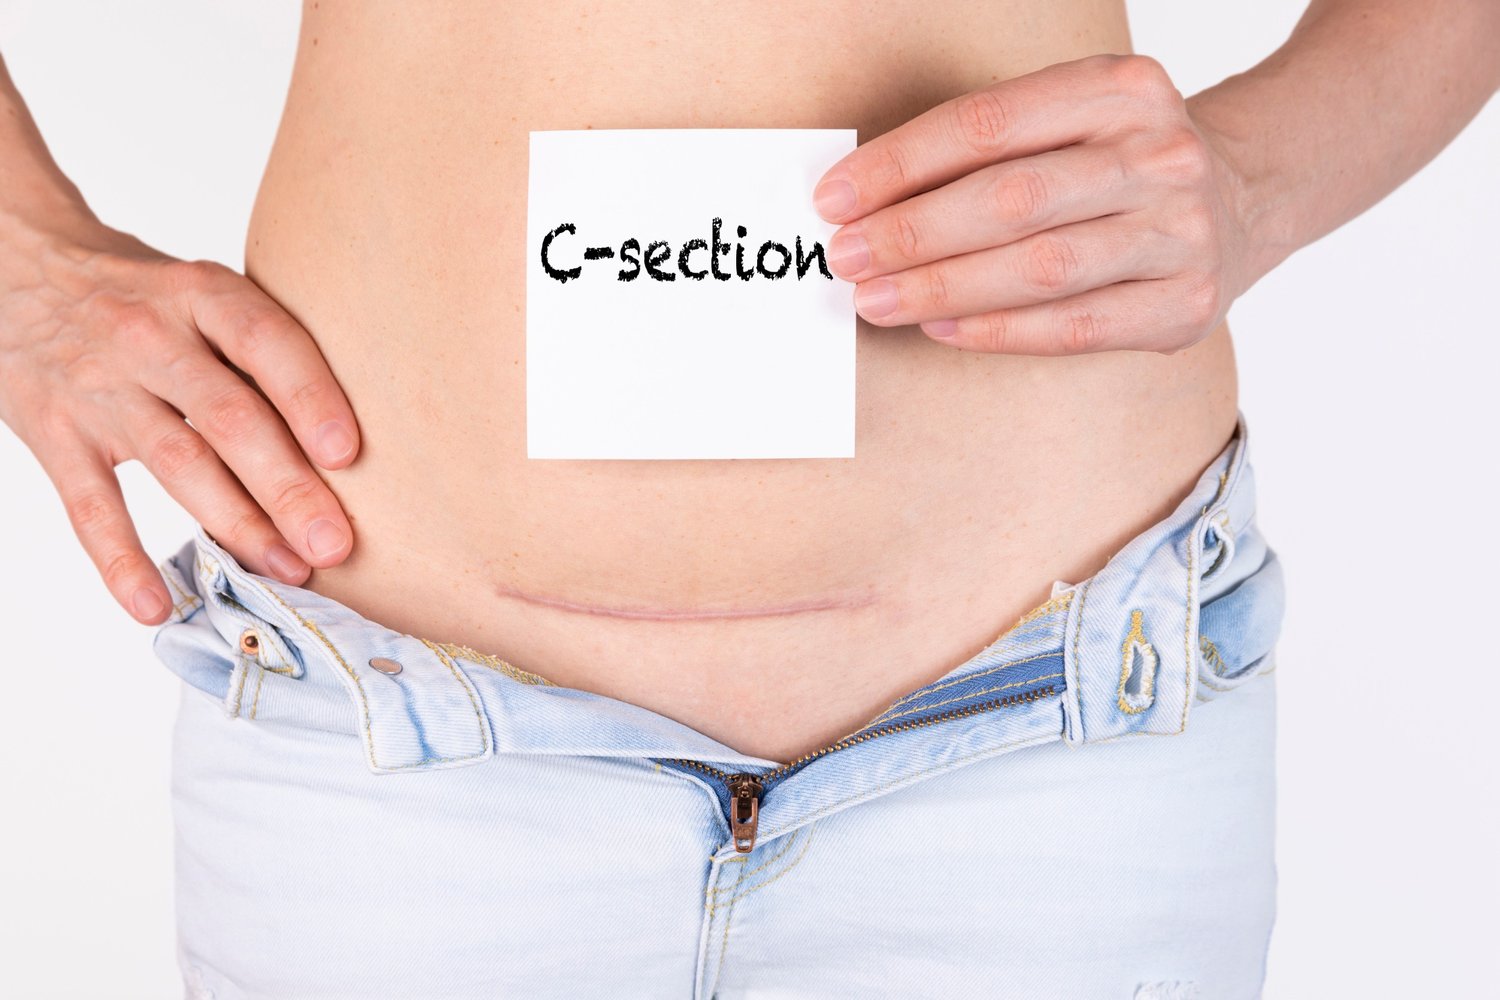 Person with c-section scar holding a note with "c-section" written on it